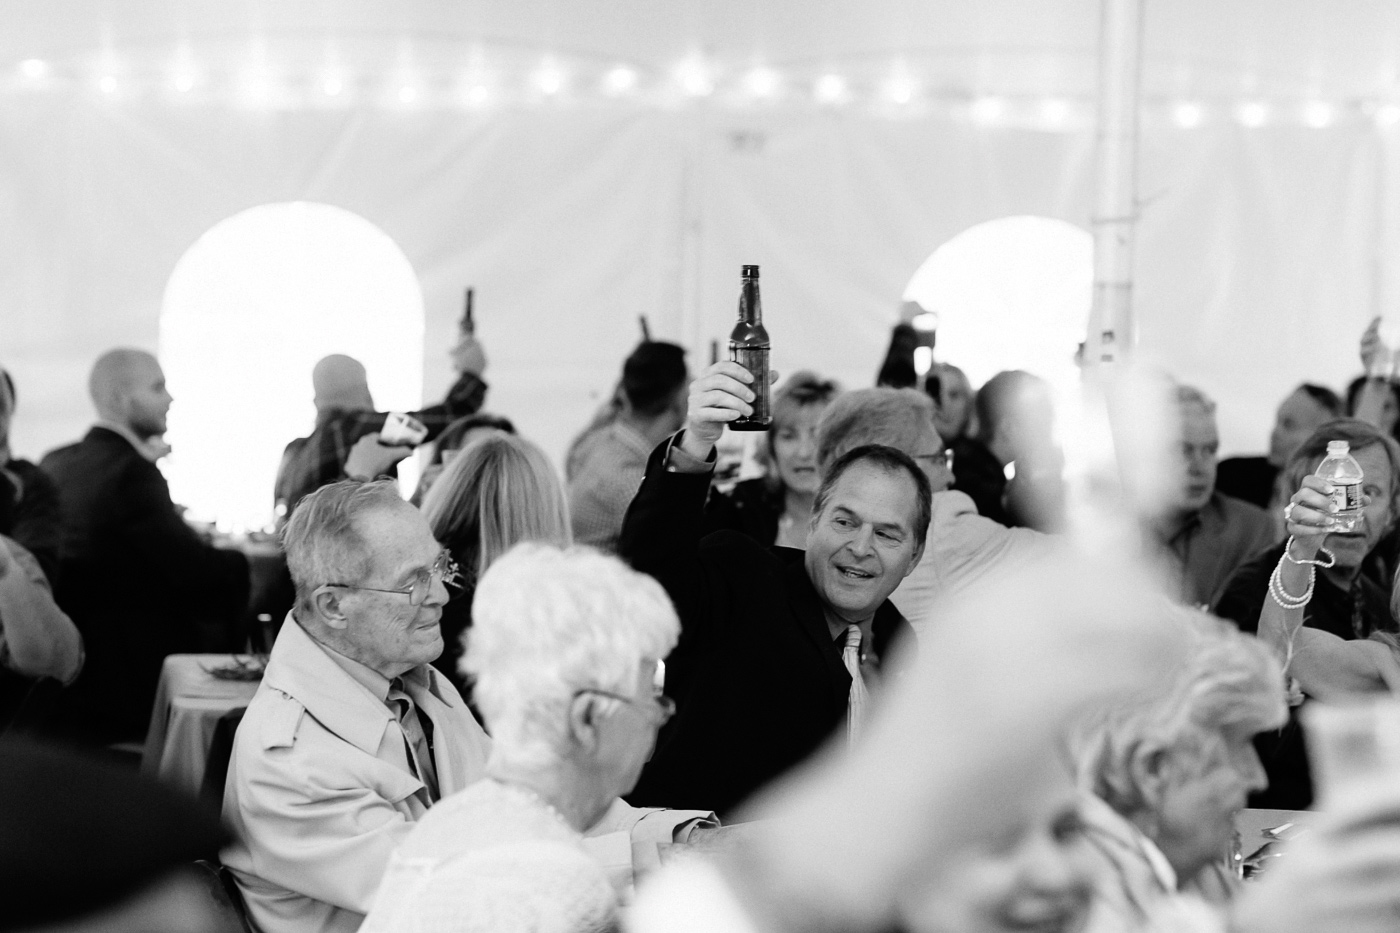 Father of the groom raising a glass